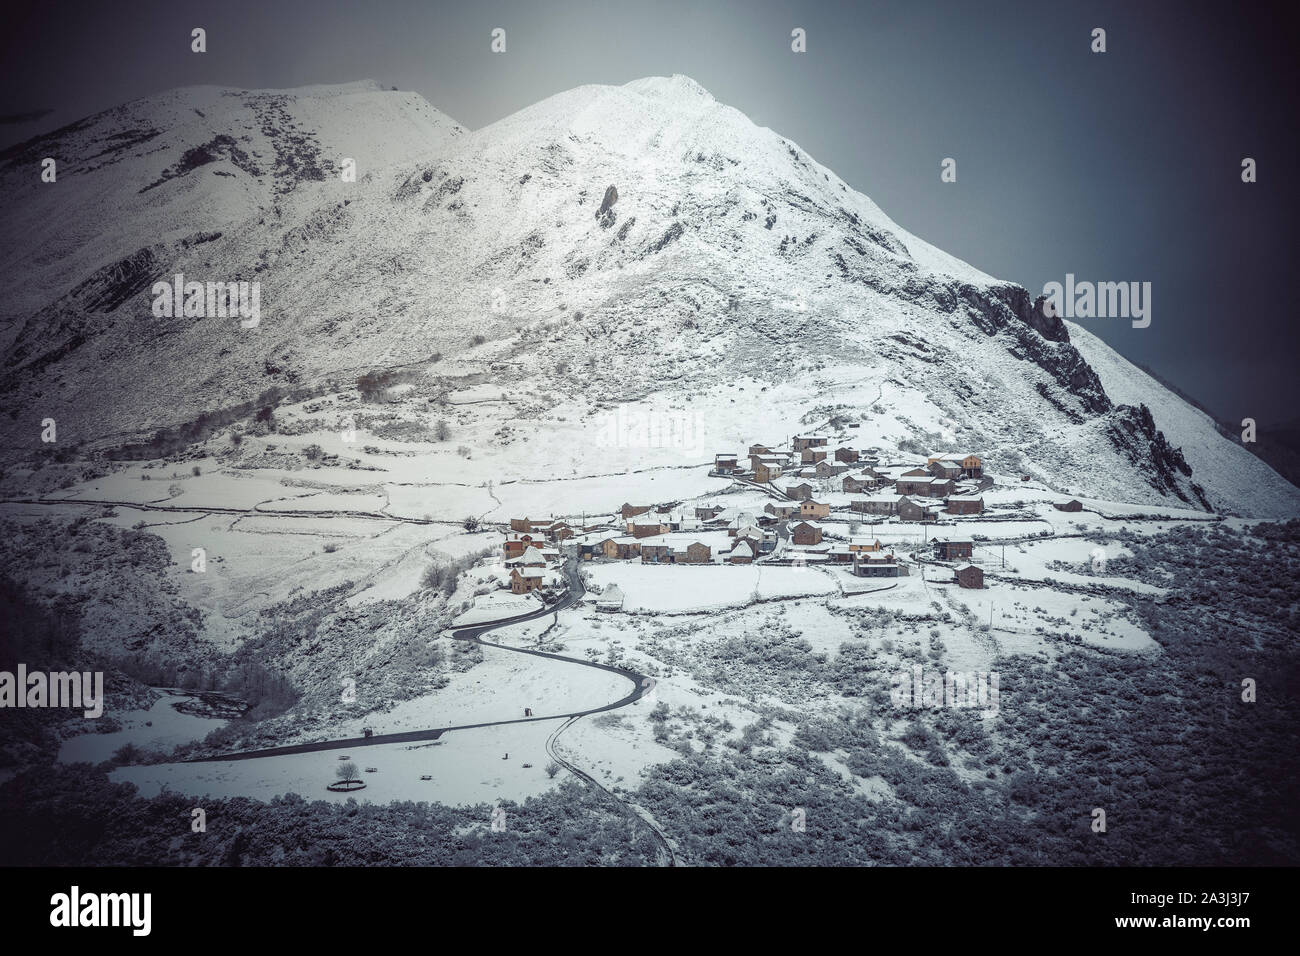 Snow town of 'La peral' in Somiedo National Park Stock Photo